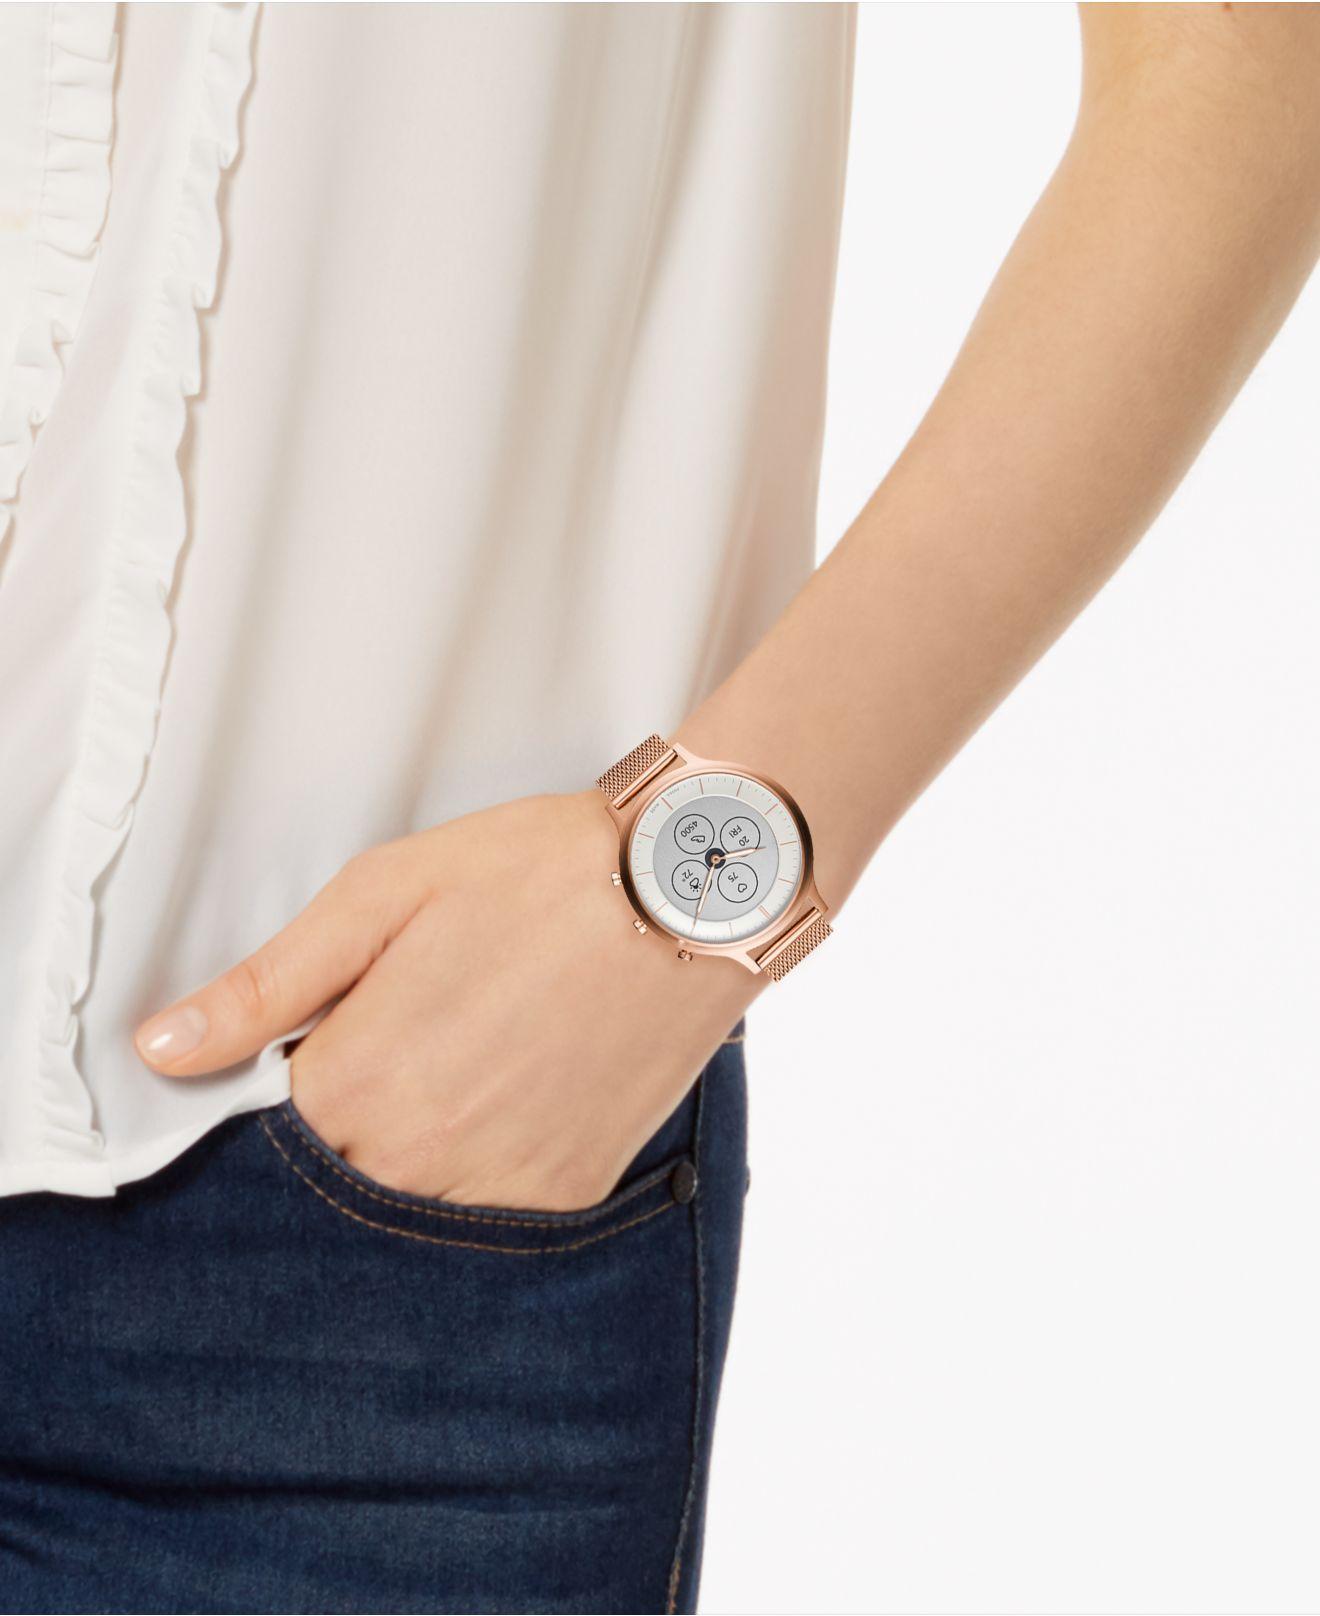 Fossil Hybrid Smartwatch Hr Charter Rose Gold Online Shop, UP TO 59% OFF |  www.moeembarcelona.com